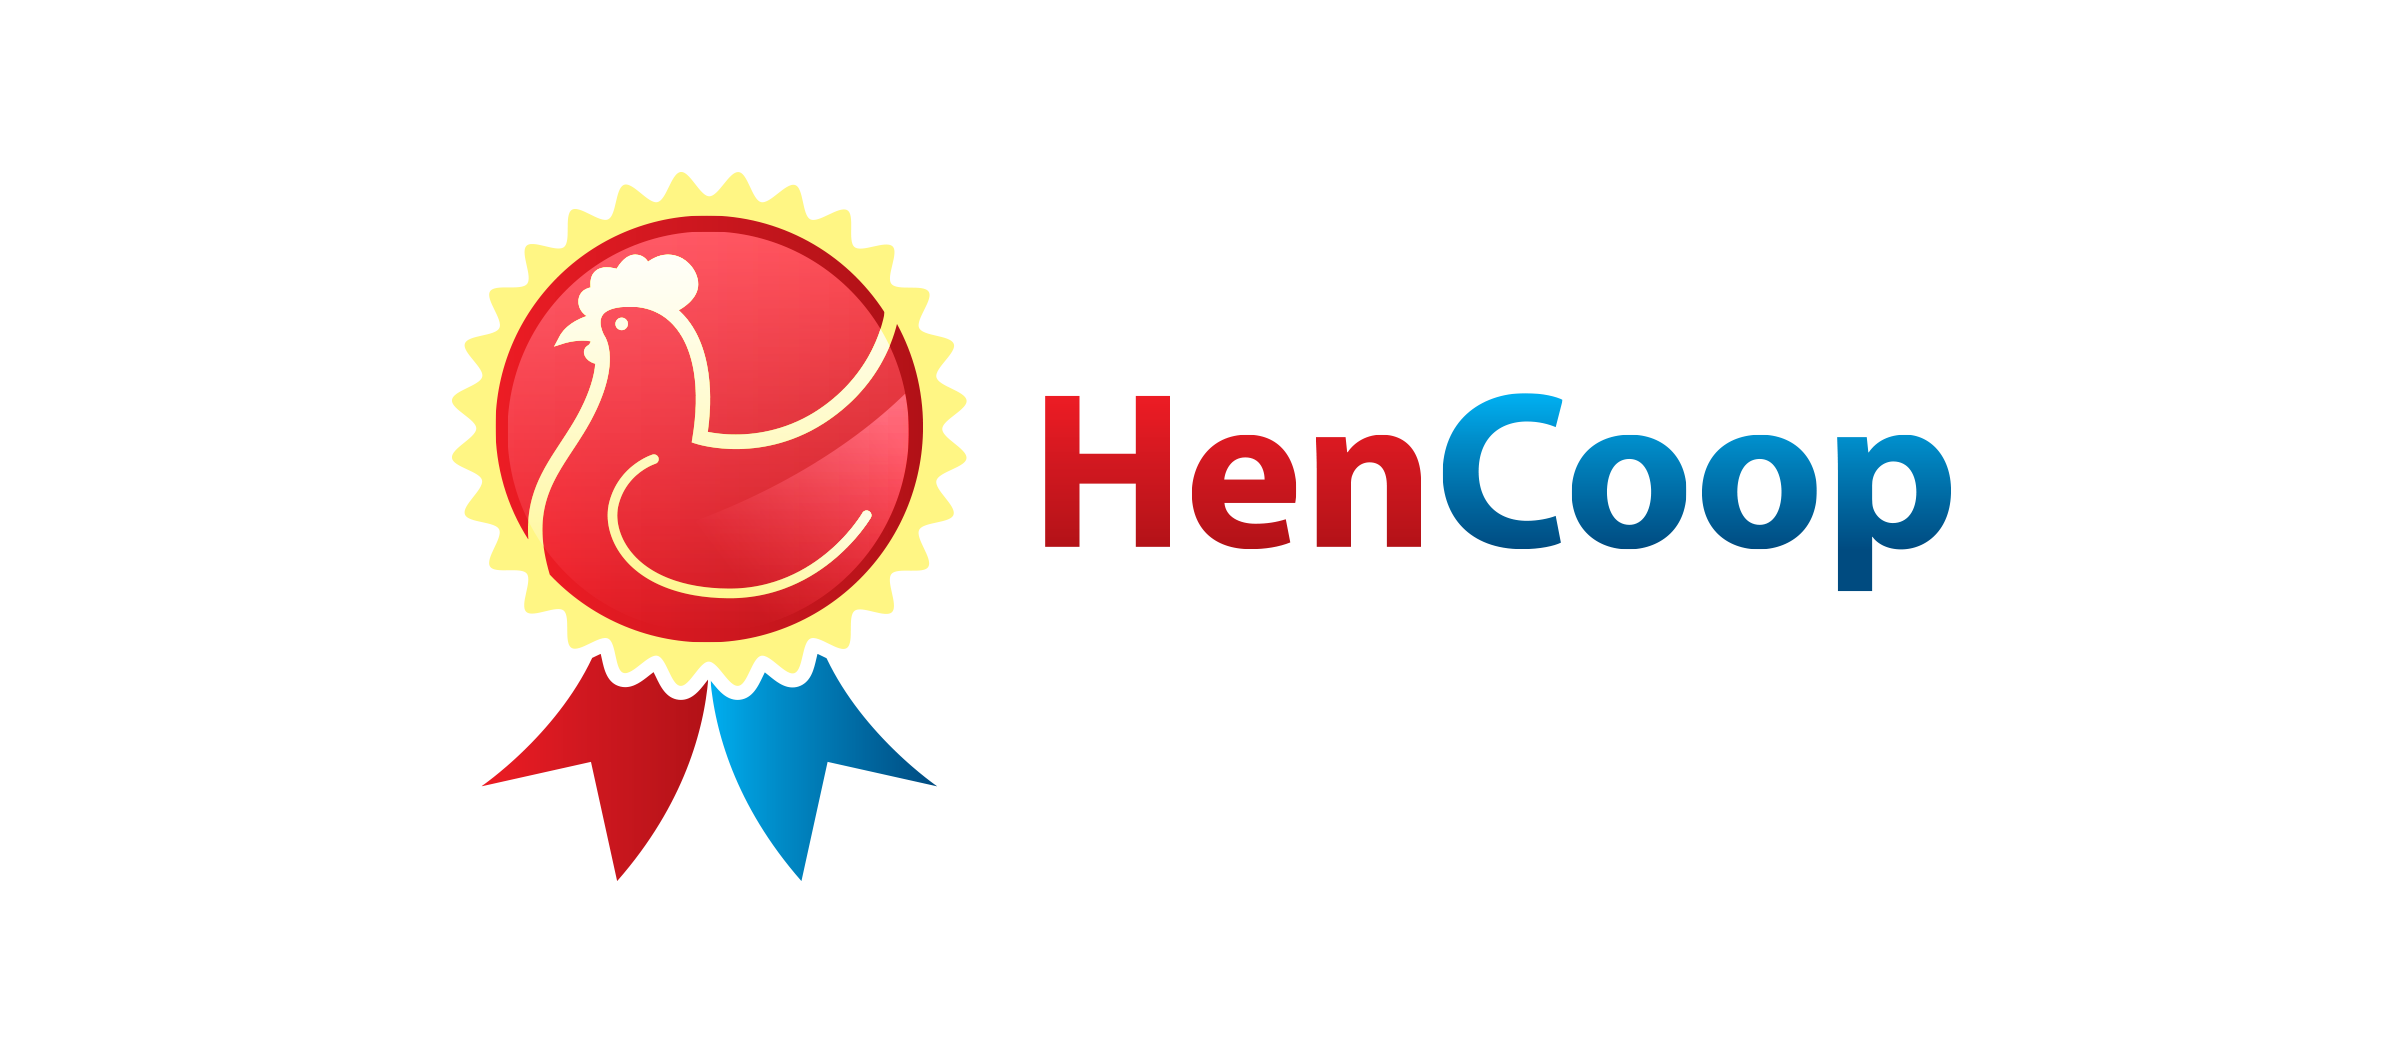 Hen Coop, a farm invention designed to keep livestock, particularly hens, from being attacked by predators.